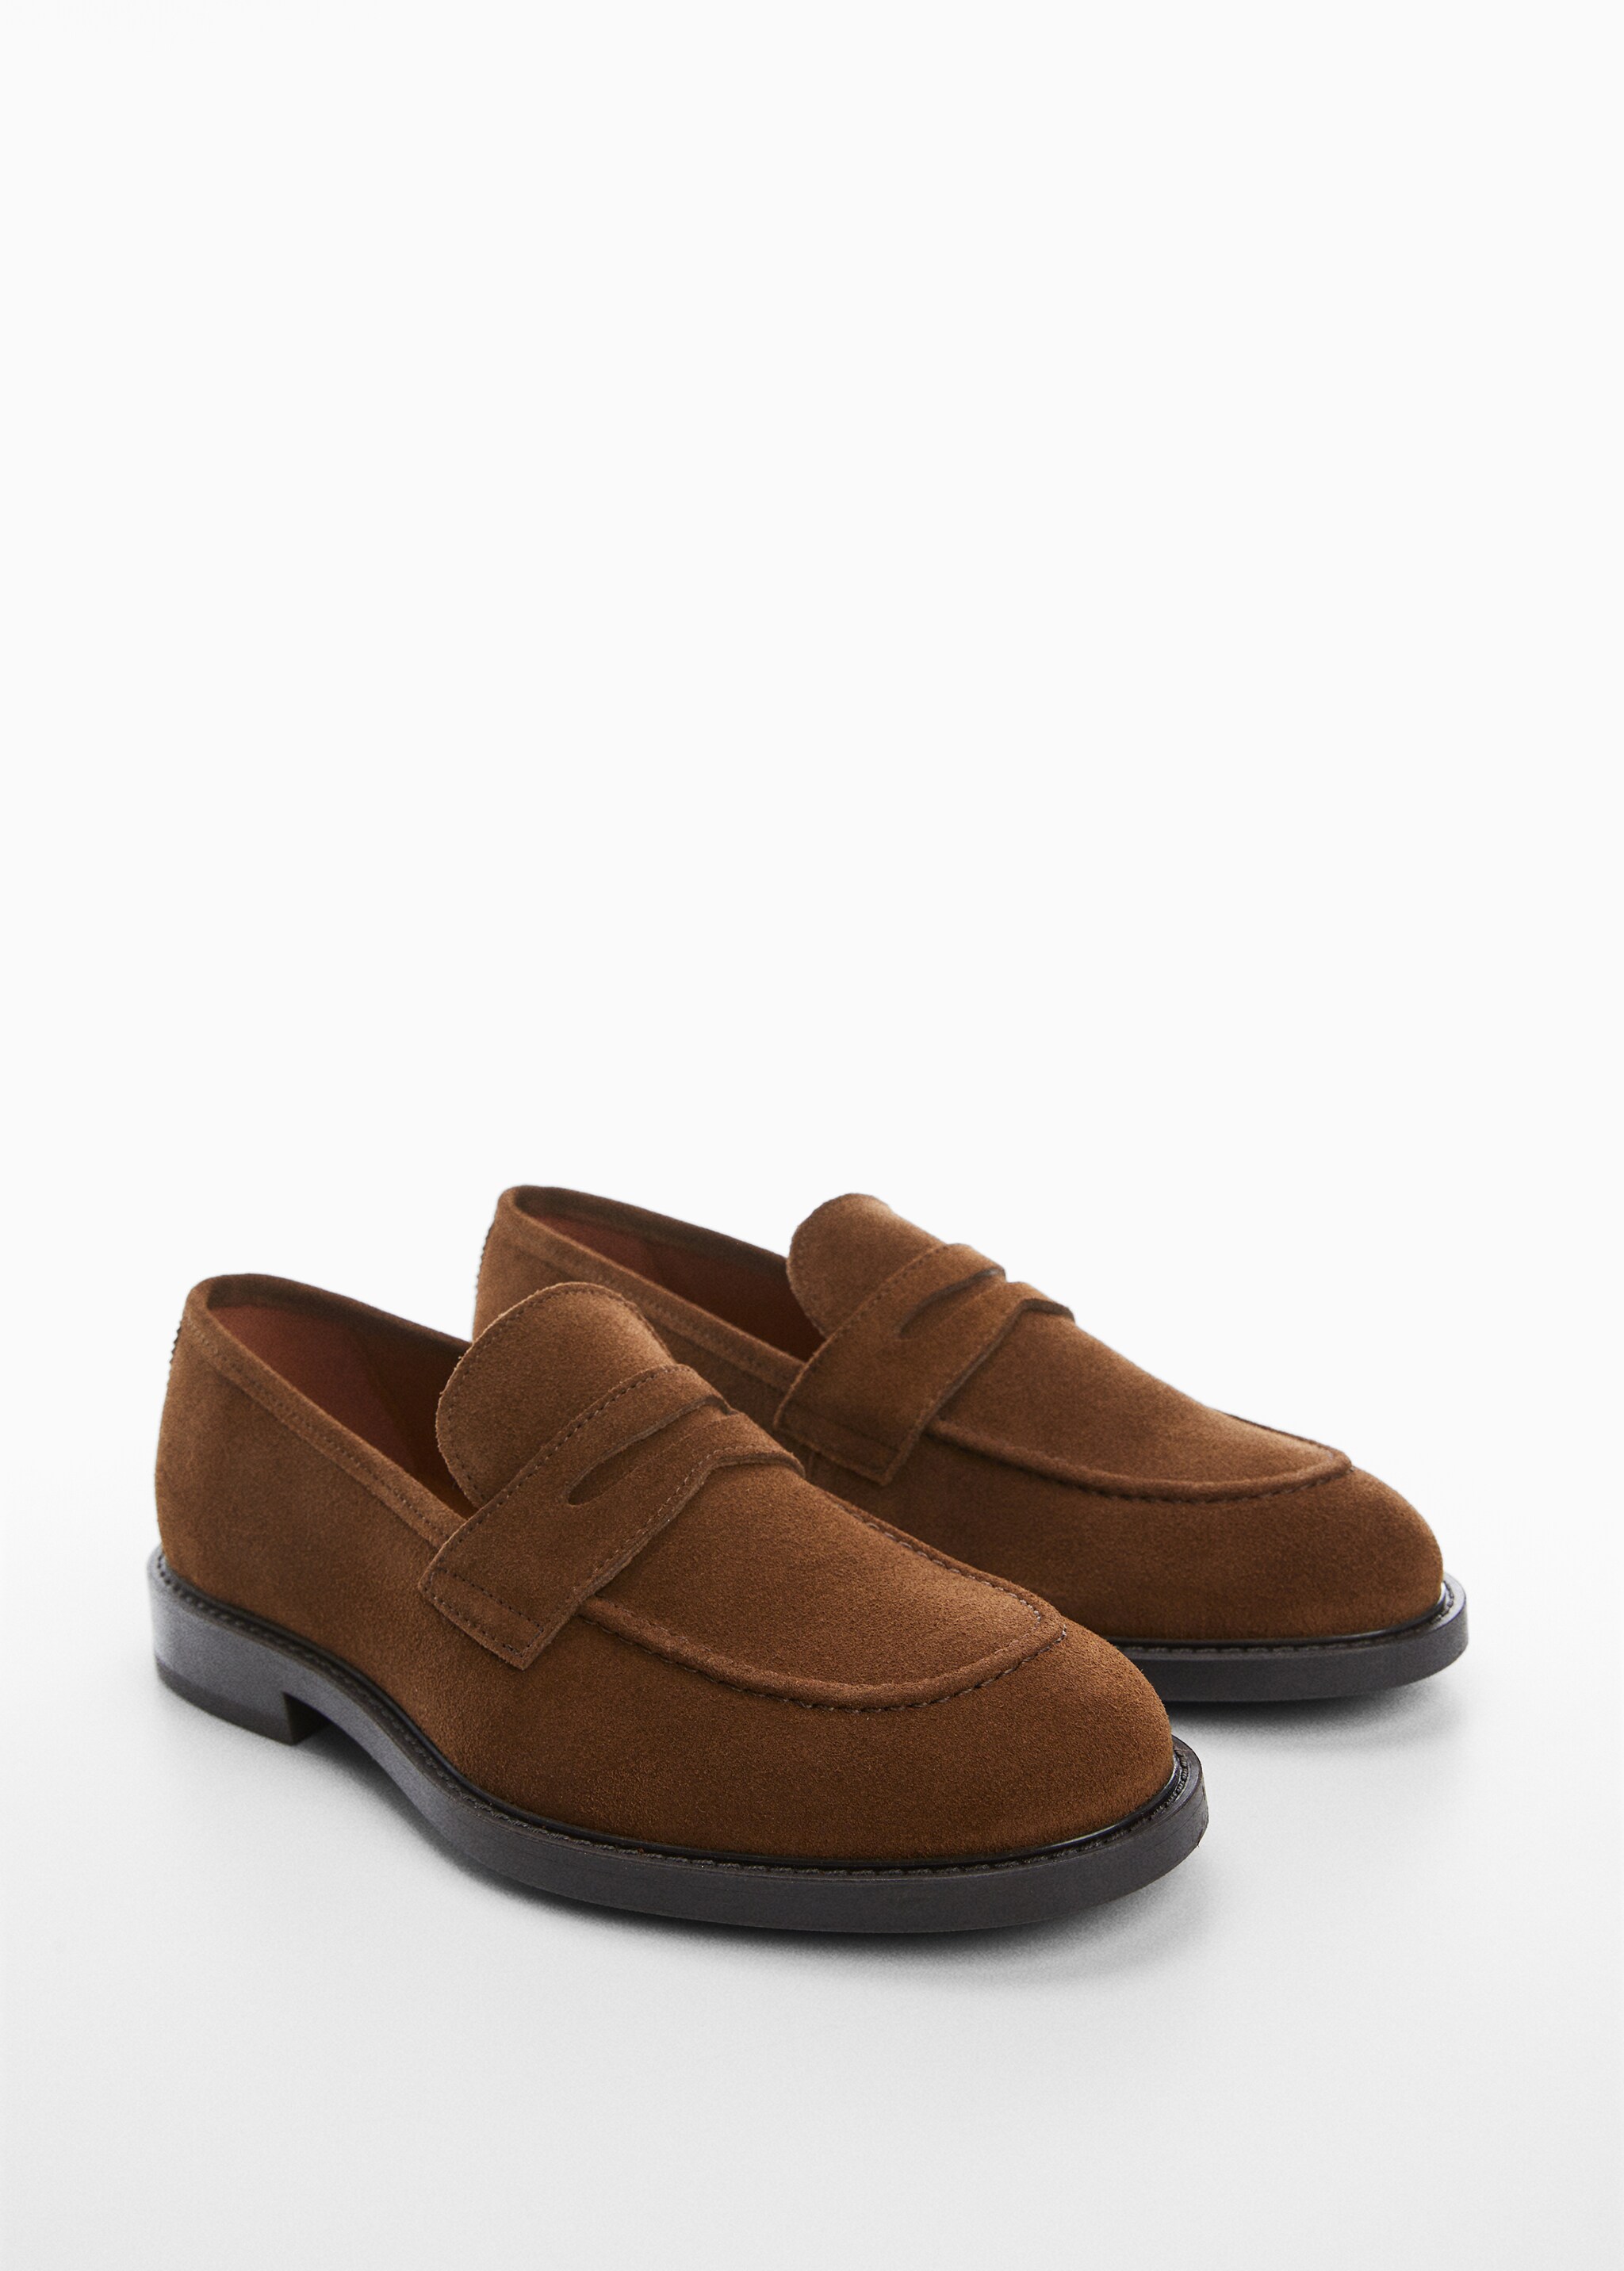 Suede leather loafers - Medium plane